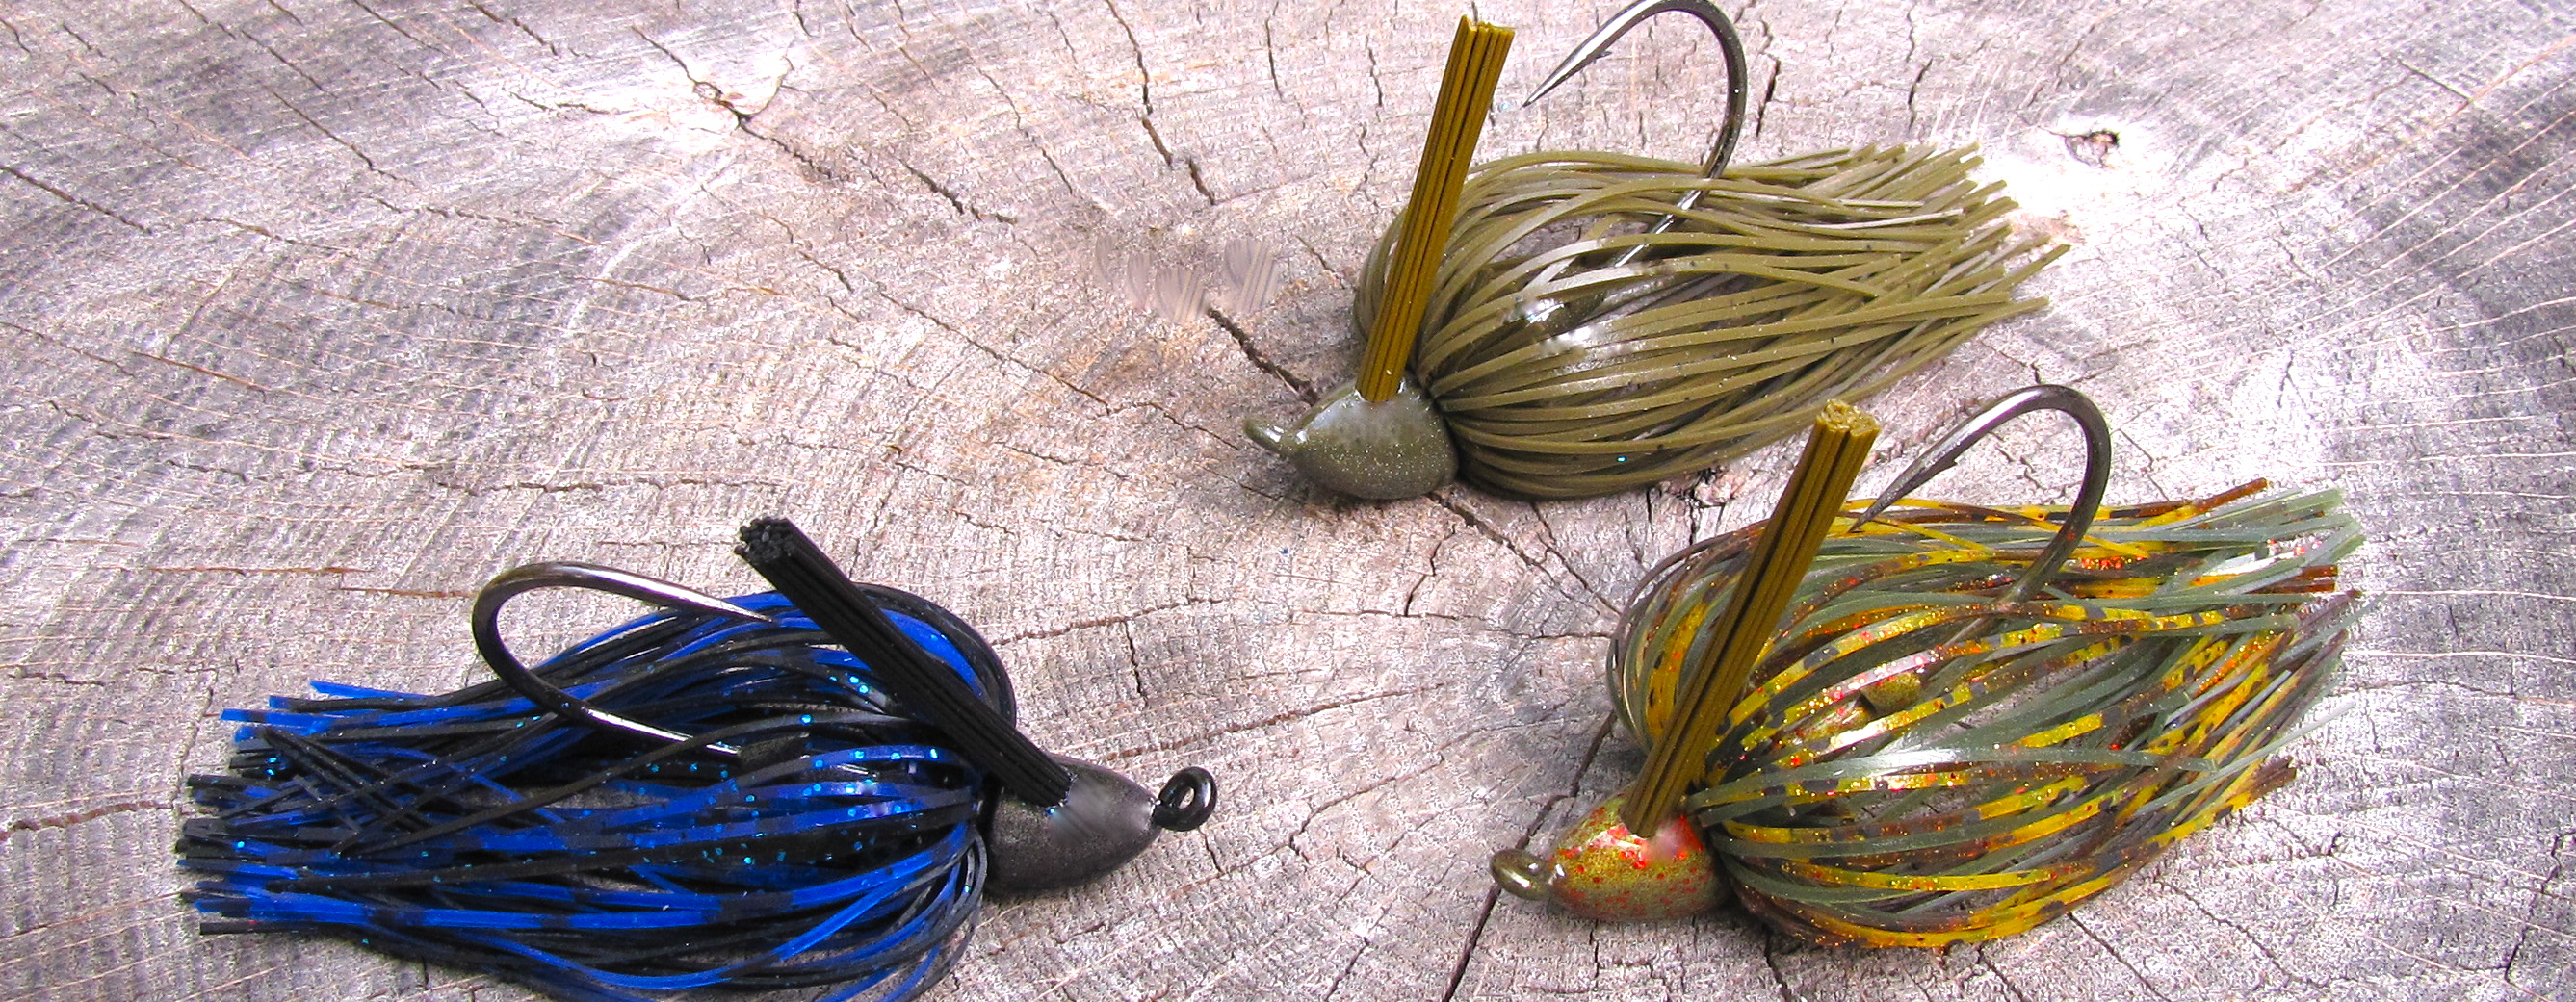 Fishing Frugal Lures Lil Bitty Jigs